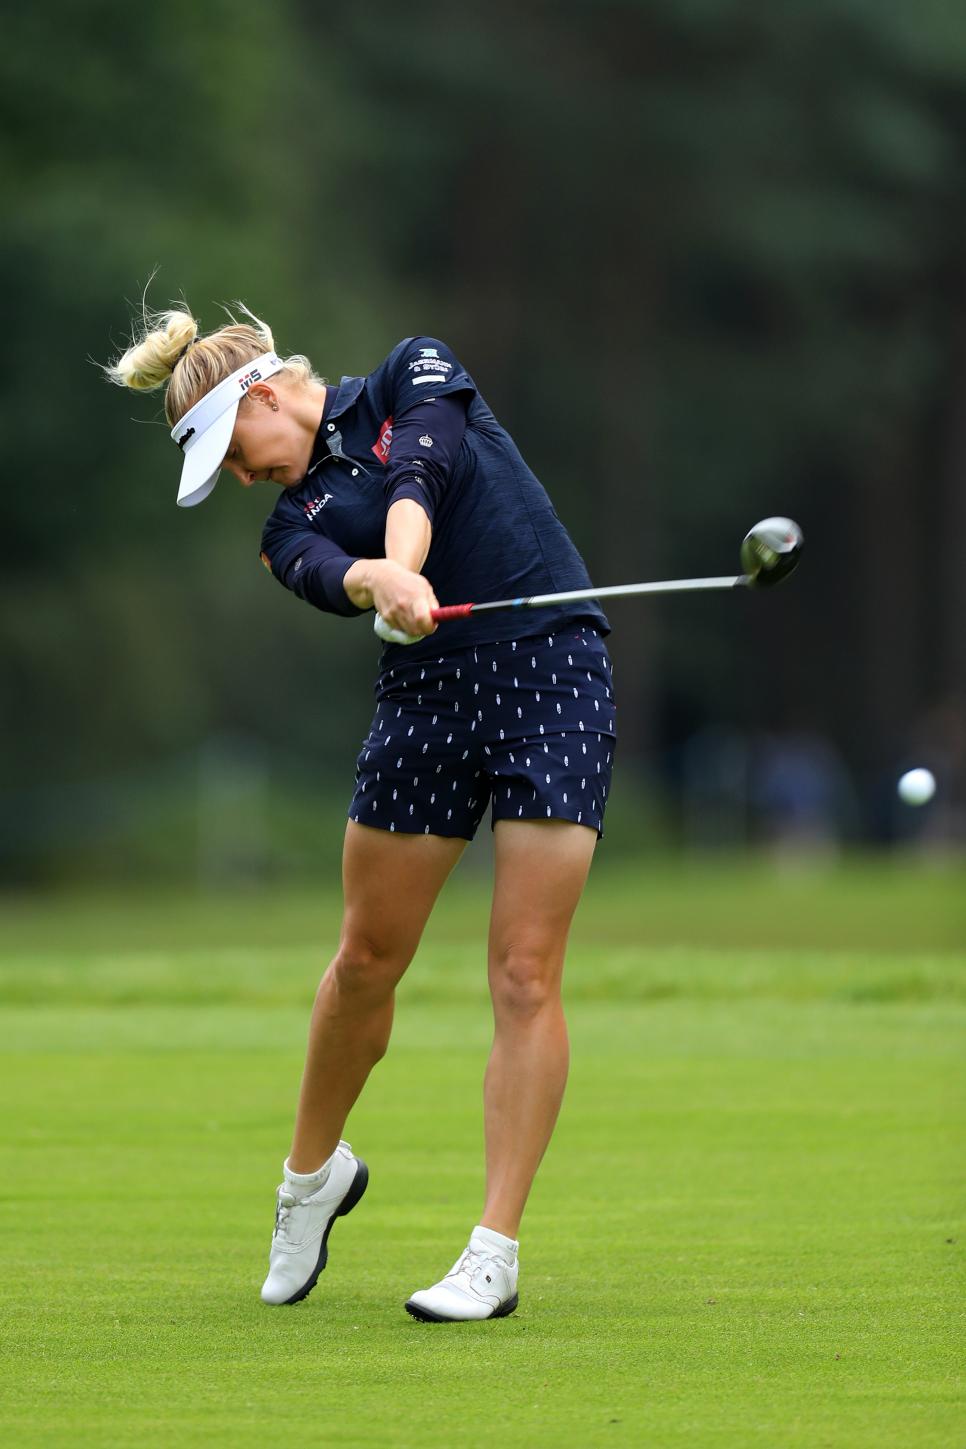 Charley Hull's plan to downplay her homecourse advantage at AIG Women